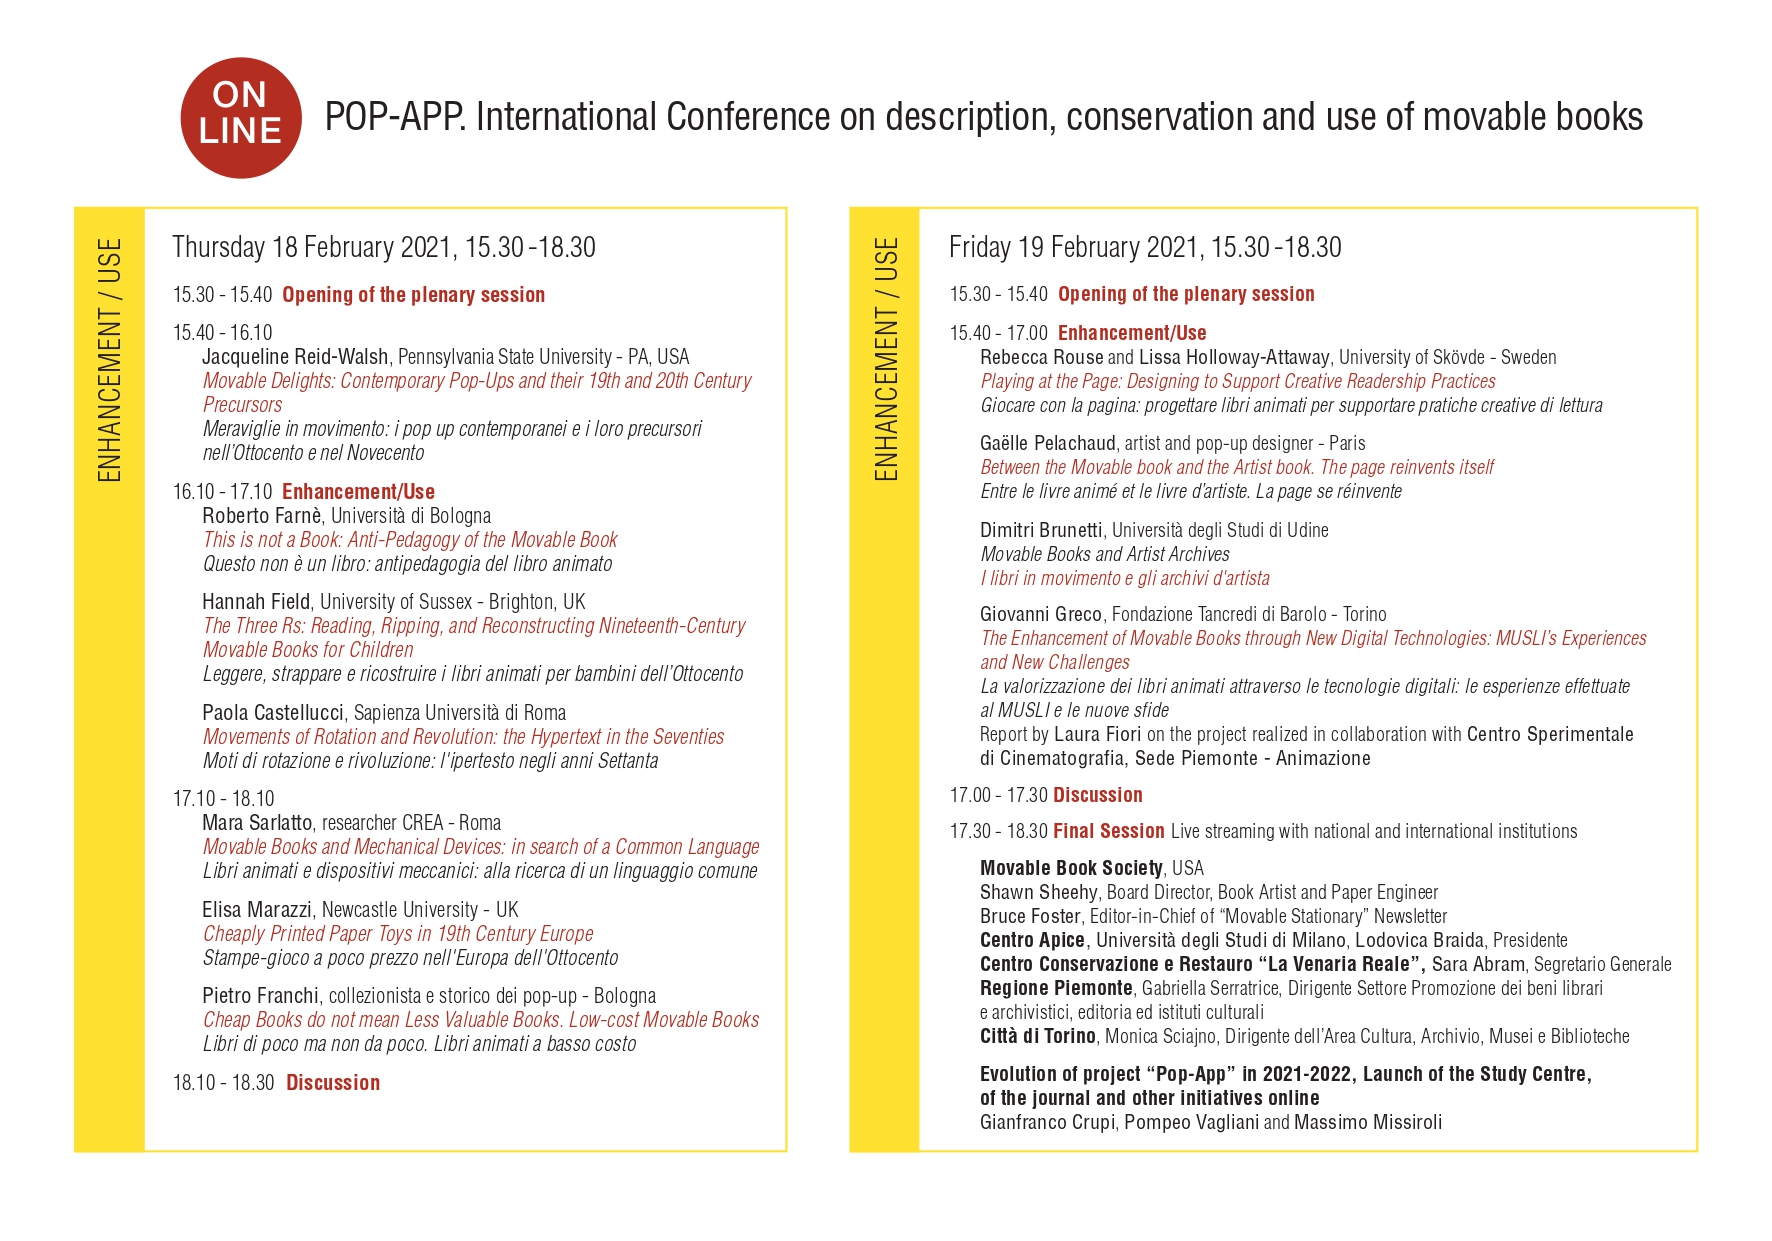 POP-APP. International Conference on description, conservation and use of movable books